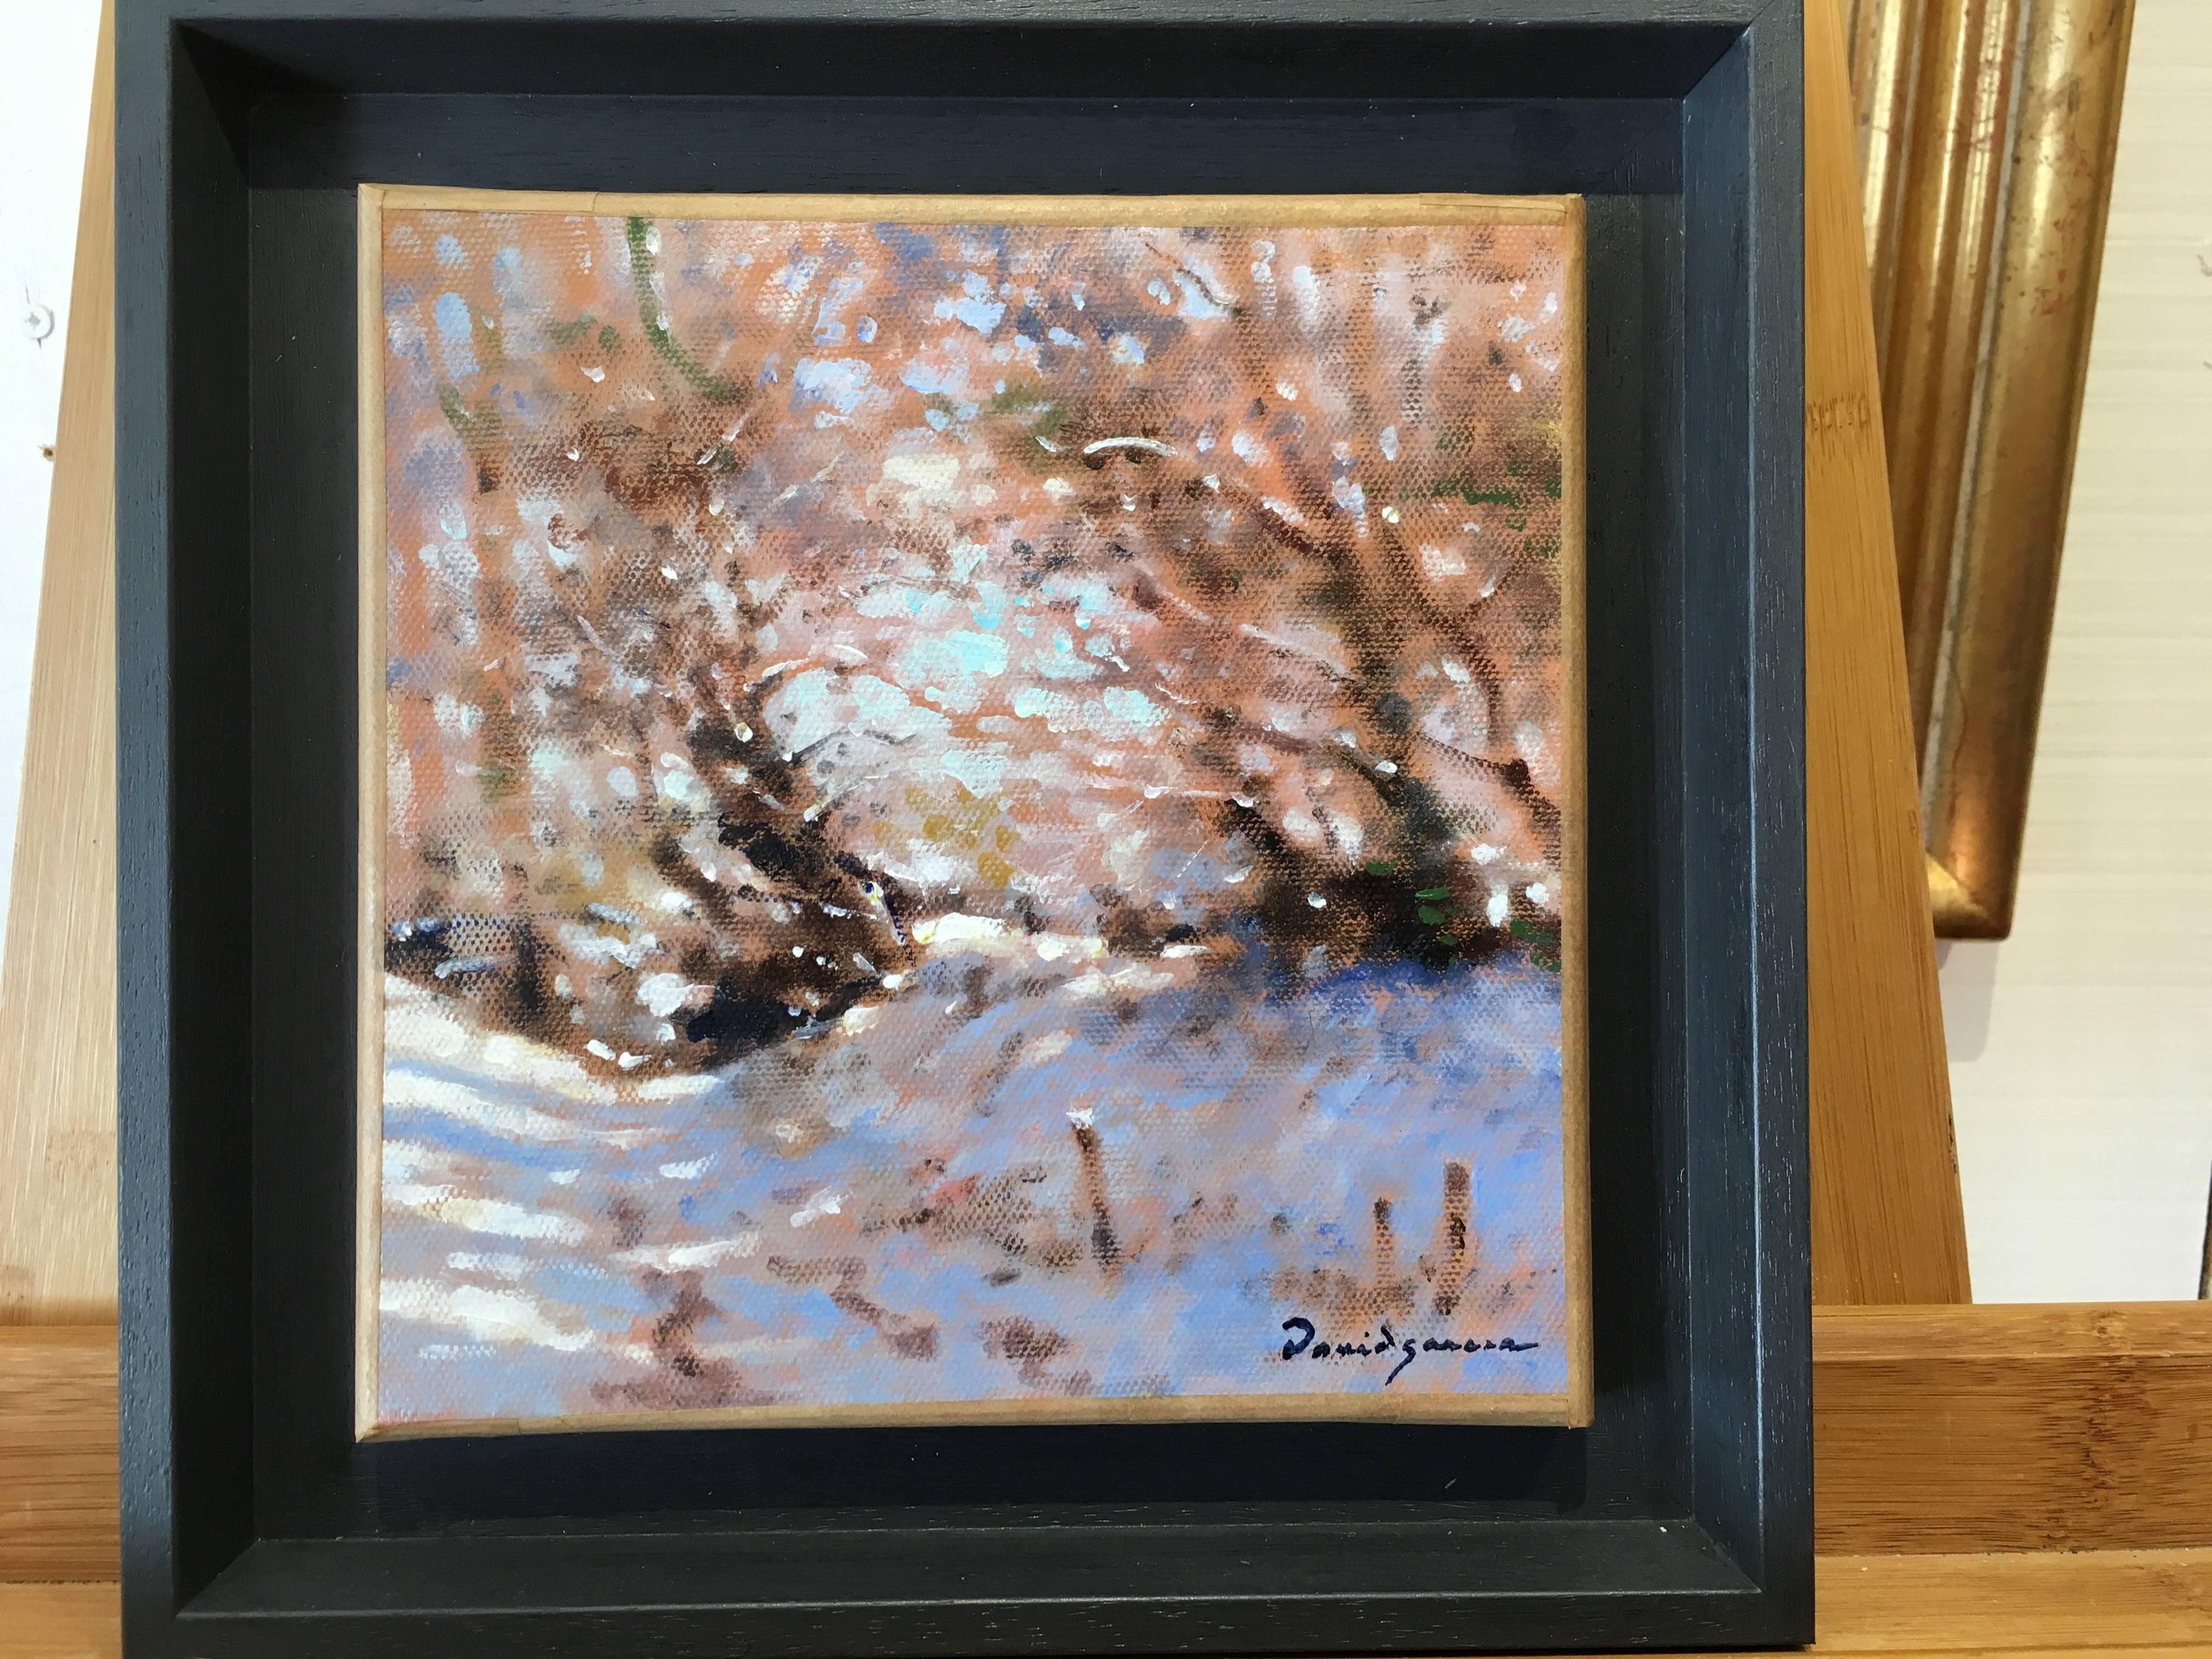 Undergrowth in winter, little oil on canvas, impressionist style - Brown Figurative Painting by David Garcia